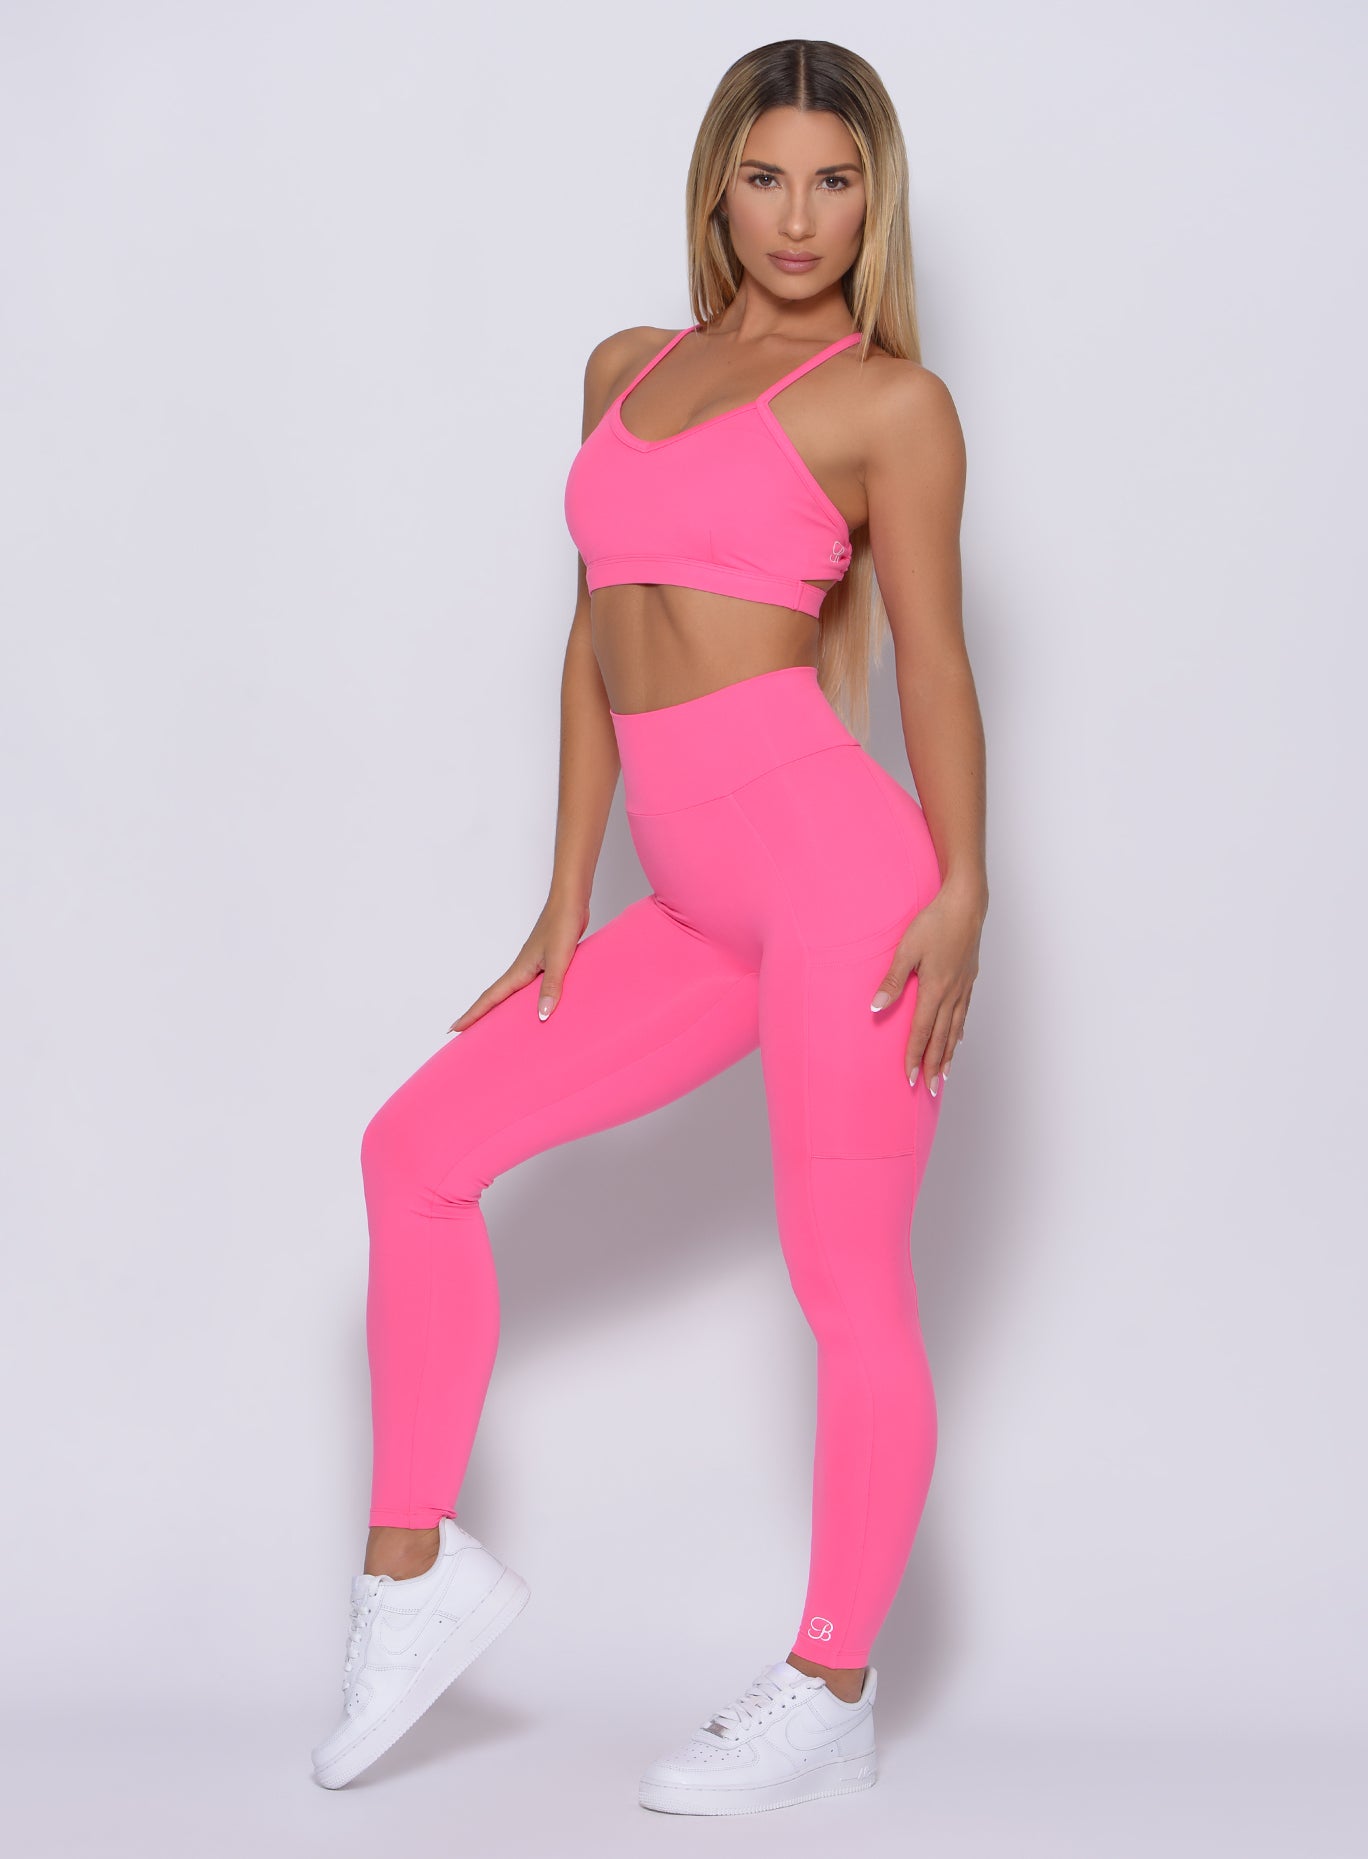 Left side view of the model facing forward wearing our curves leggings in party pink color and a matching bra